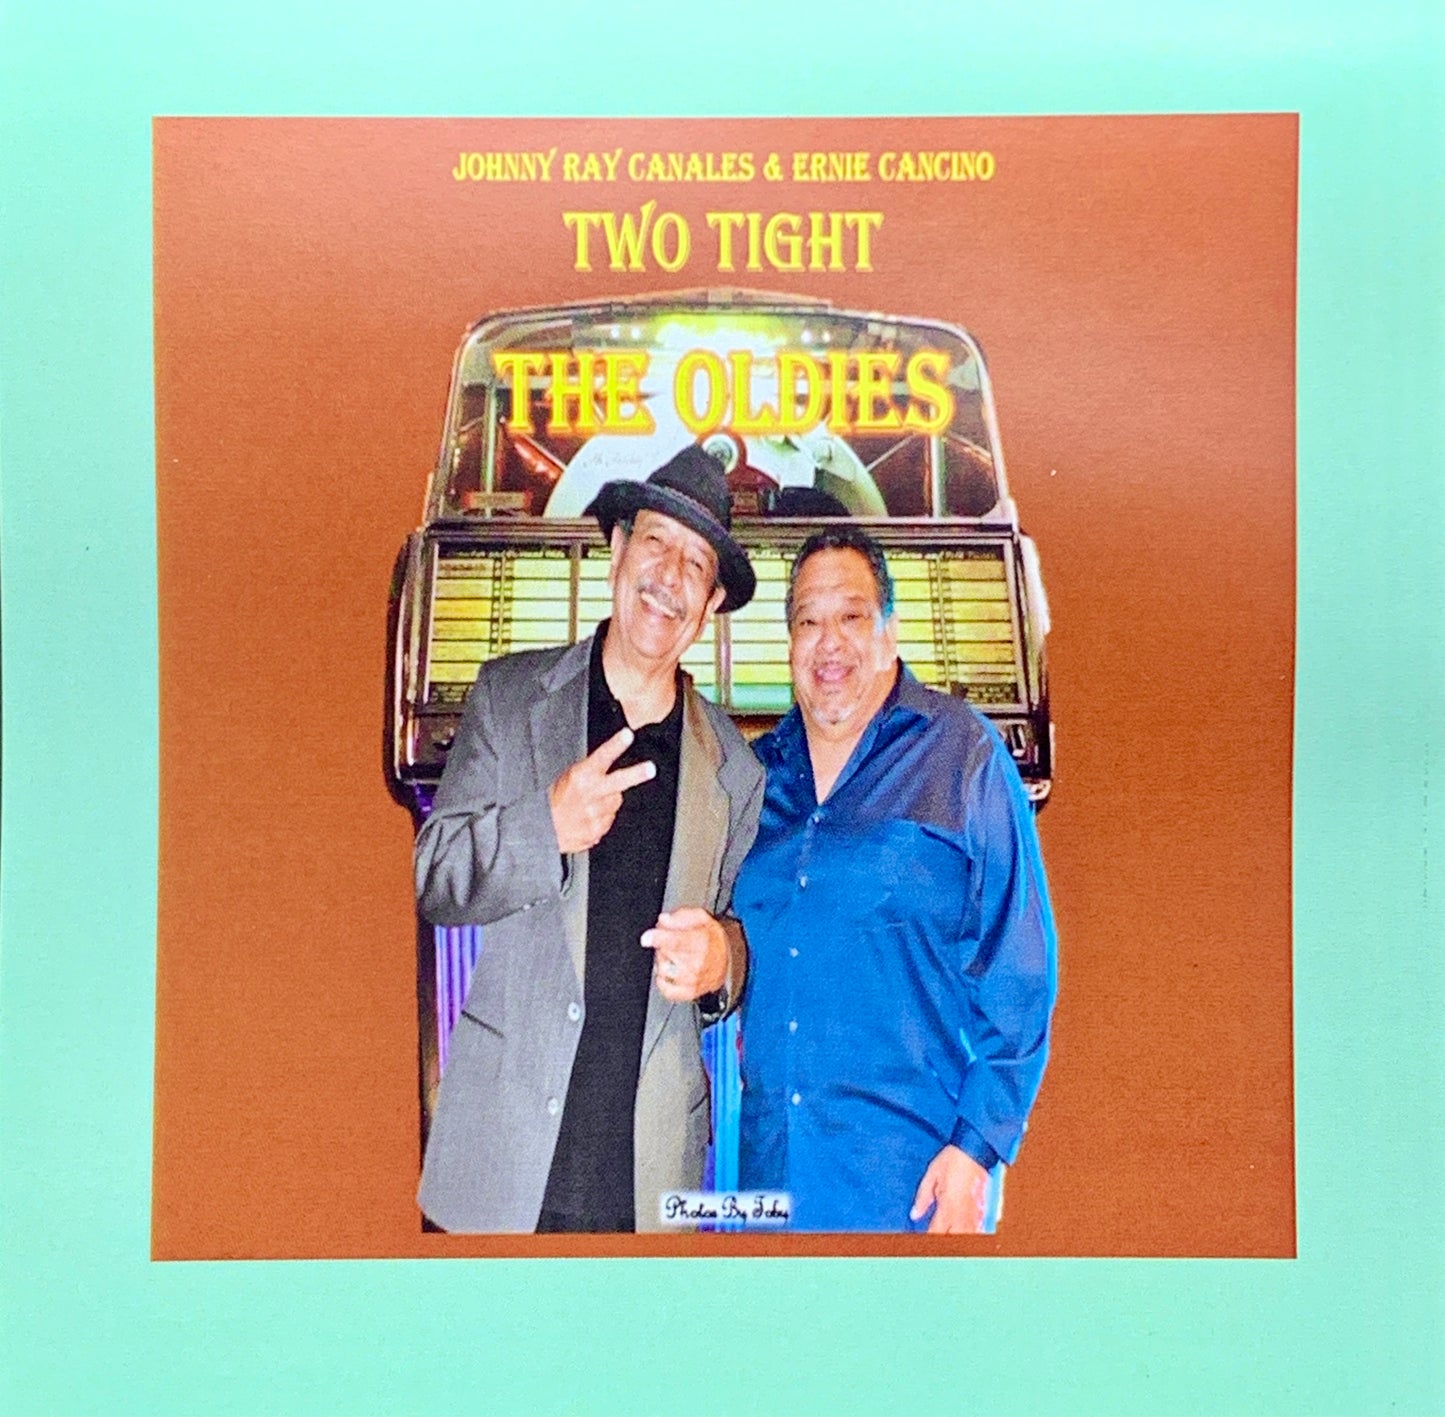 Johnny Ray Canales & Two Tight - The Oldies (CD)